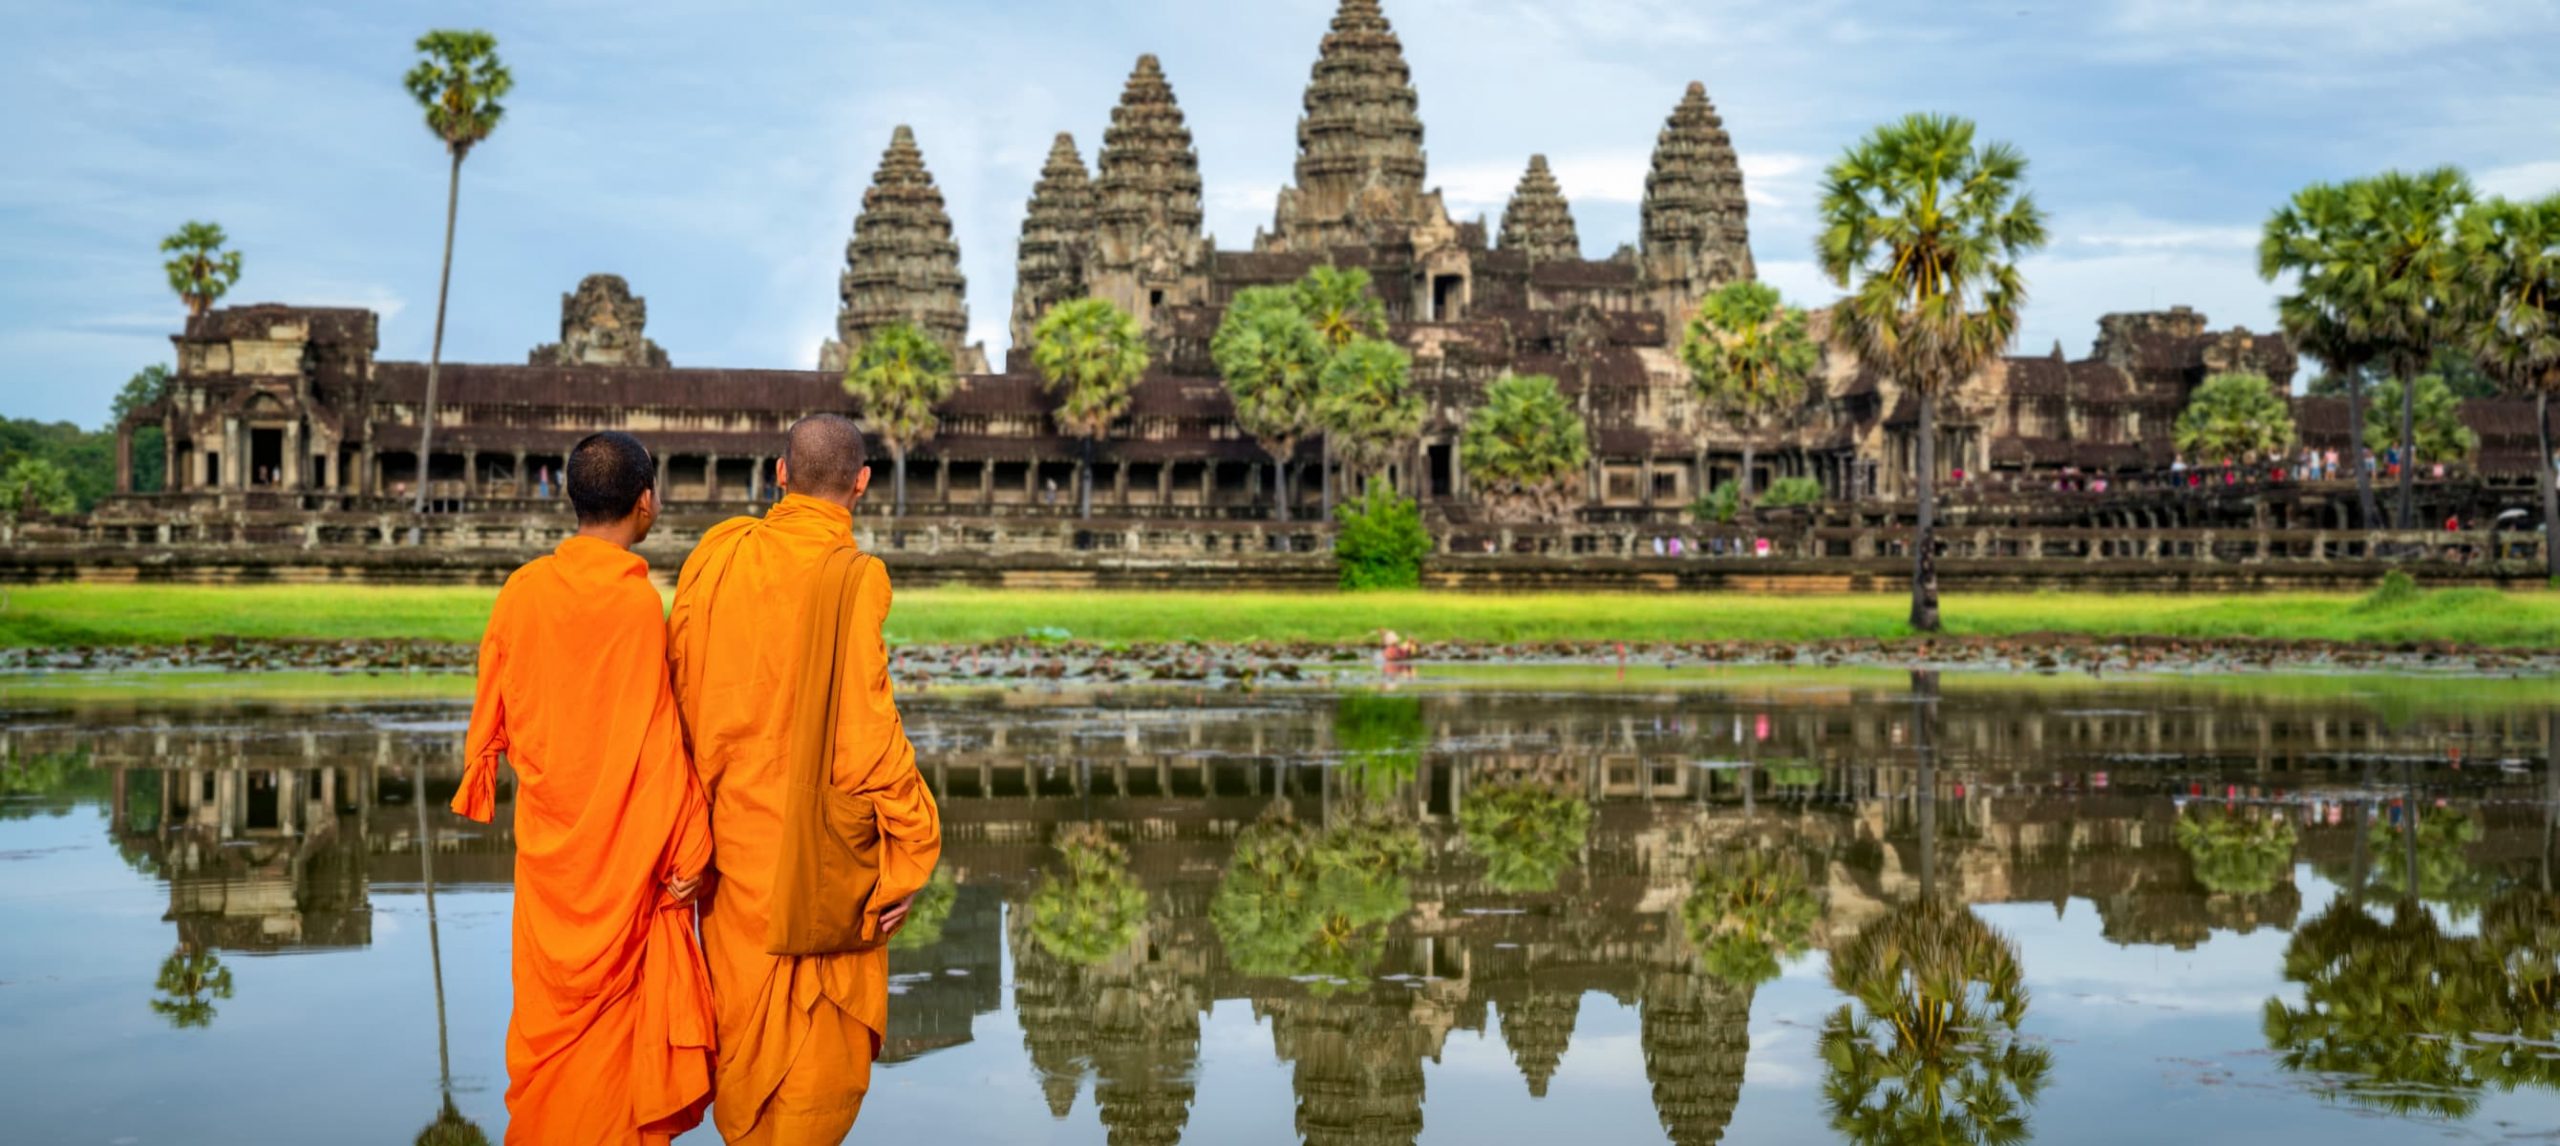 Two monks in Angkor Wat, in Cambodia.